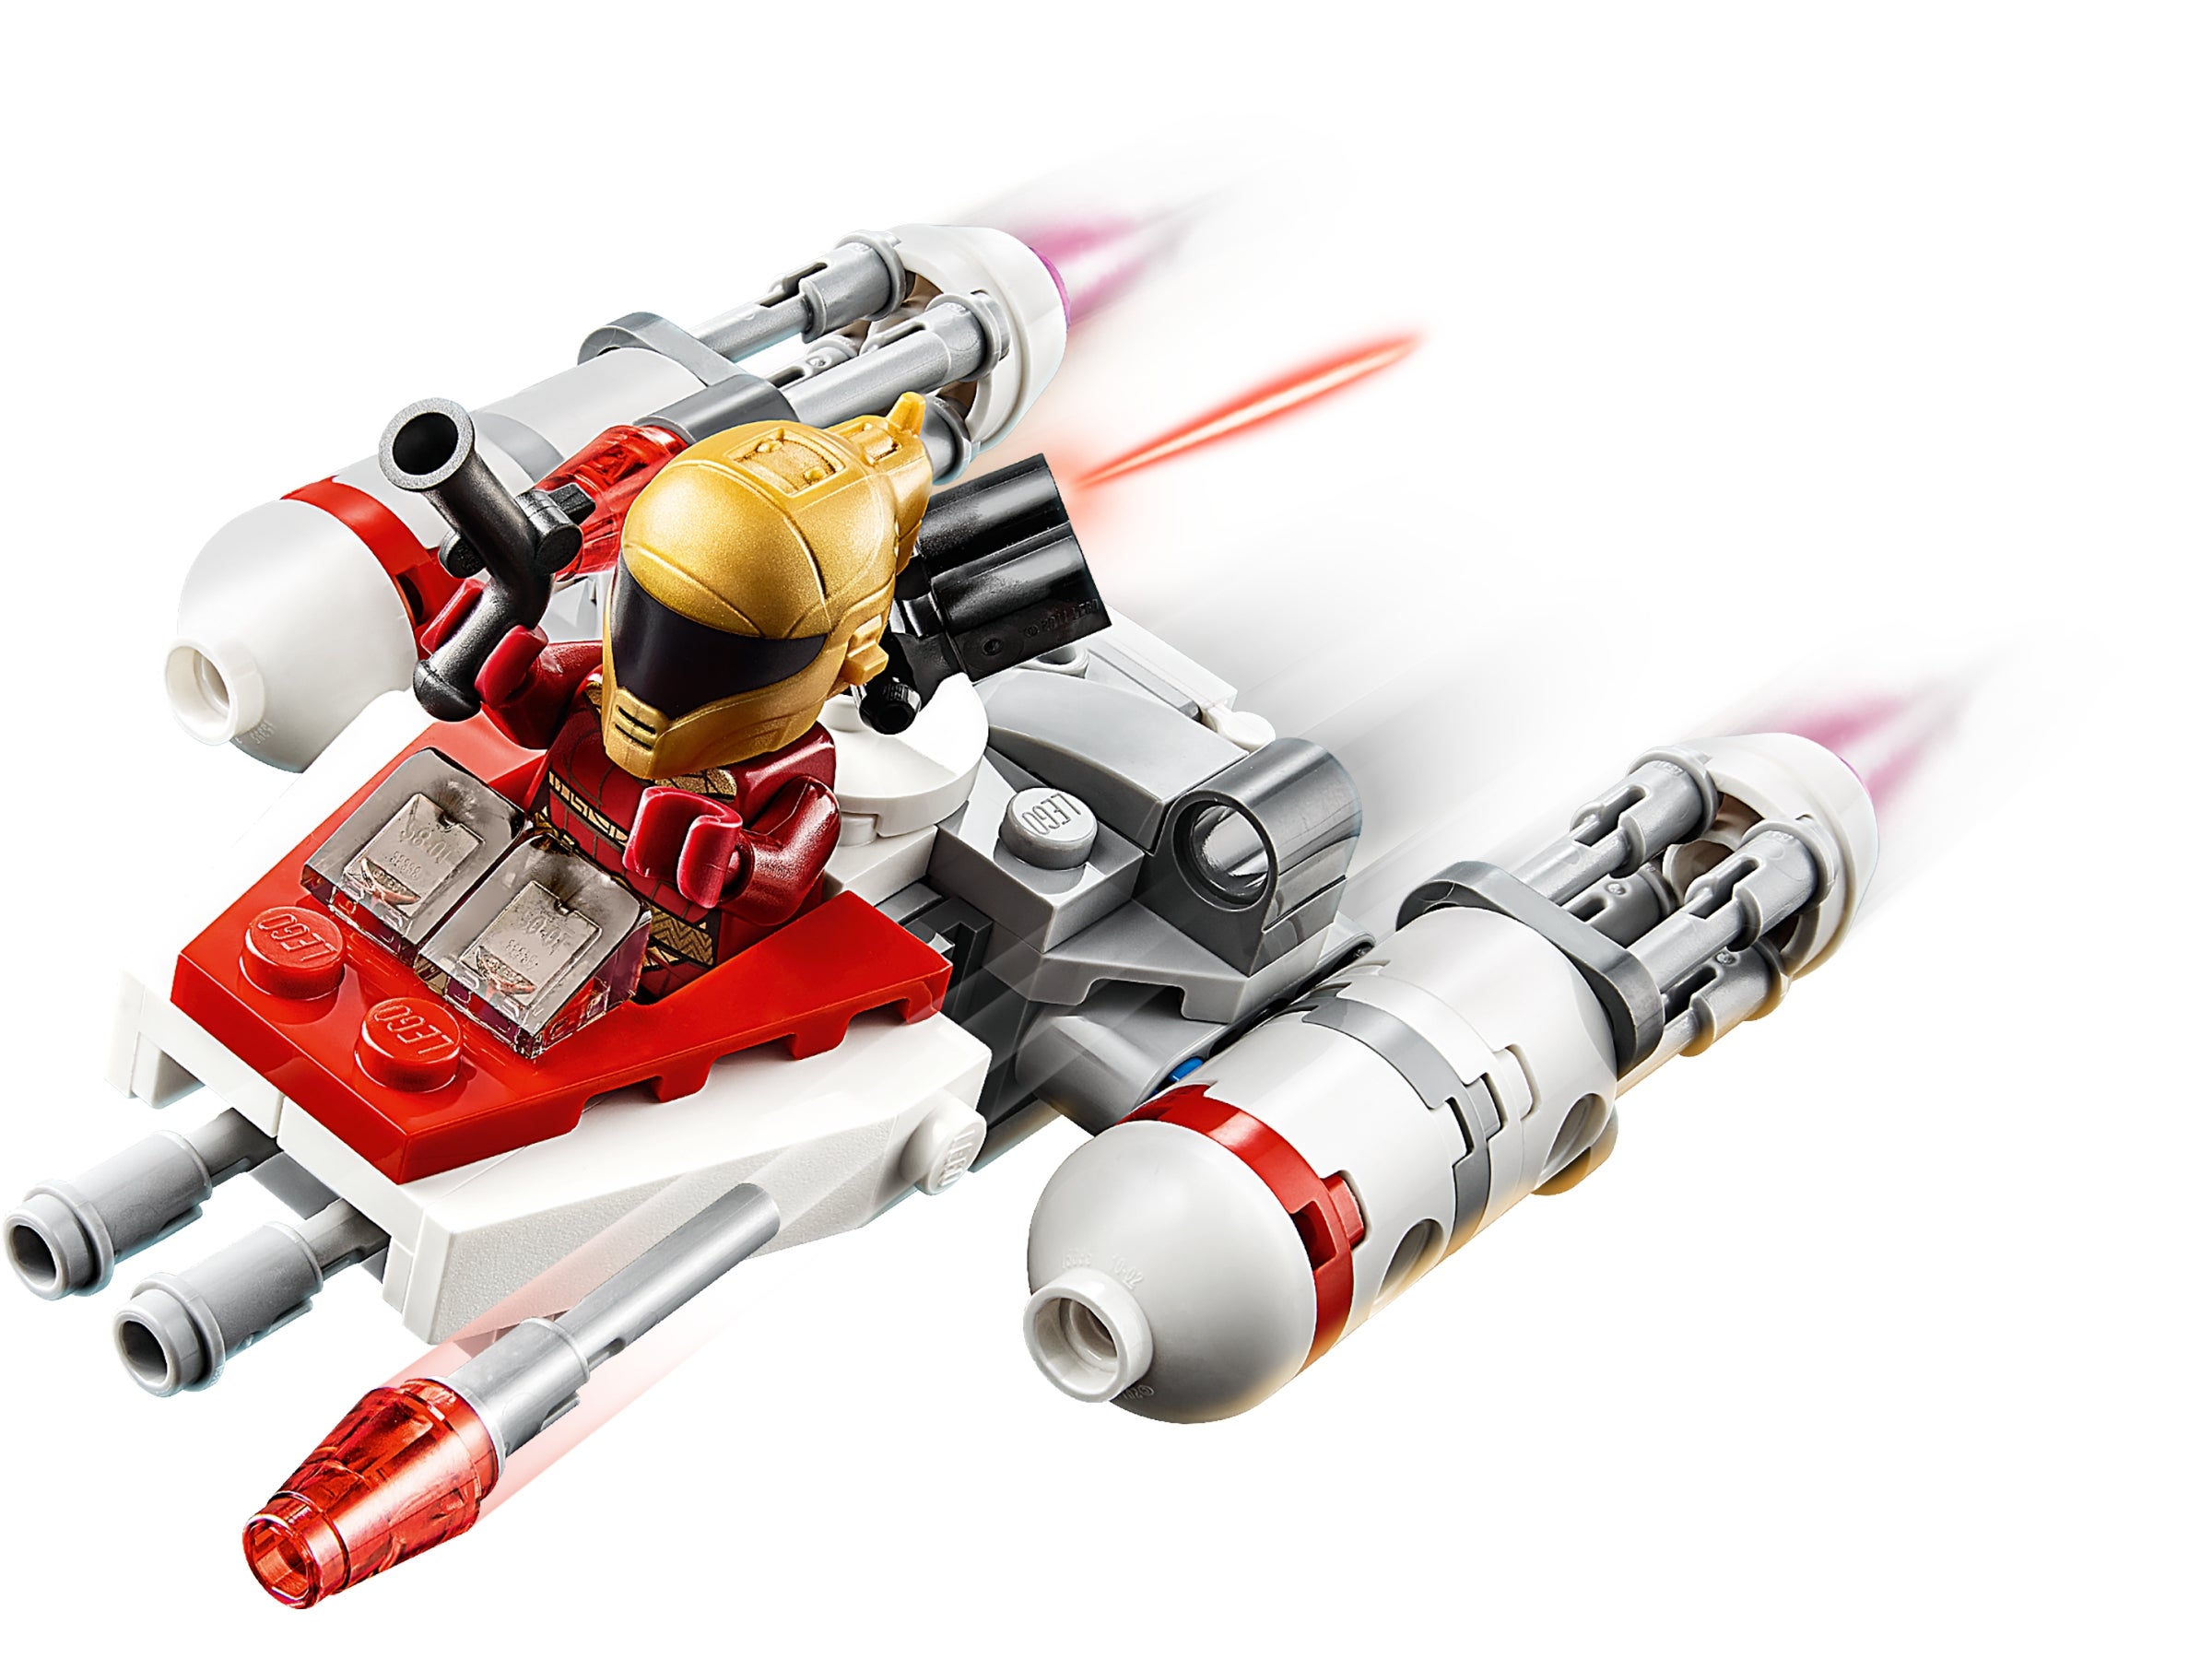 LEGO Resistance Y-wing Microfighter Star Wars TM for sale online 75263